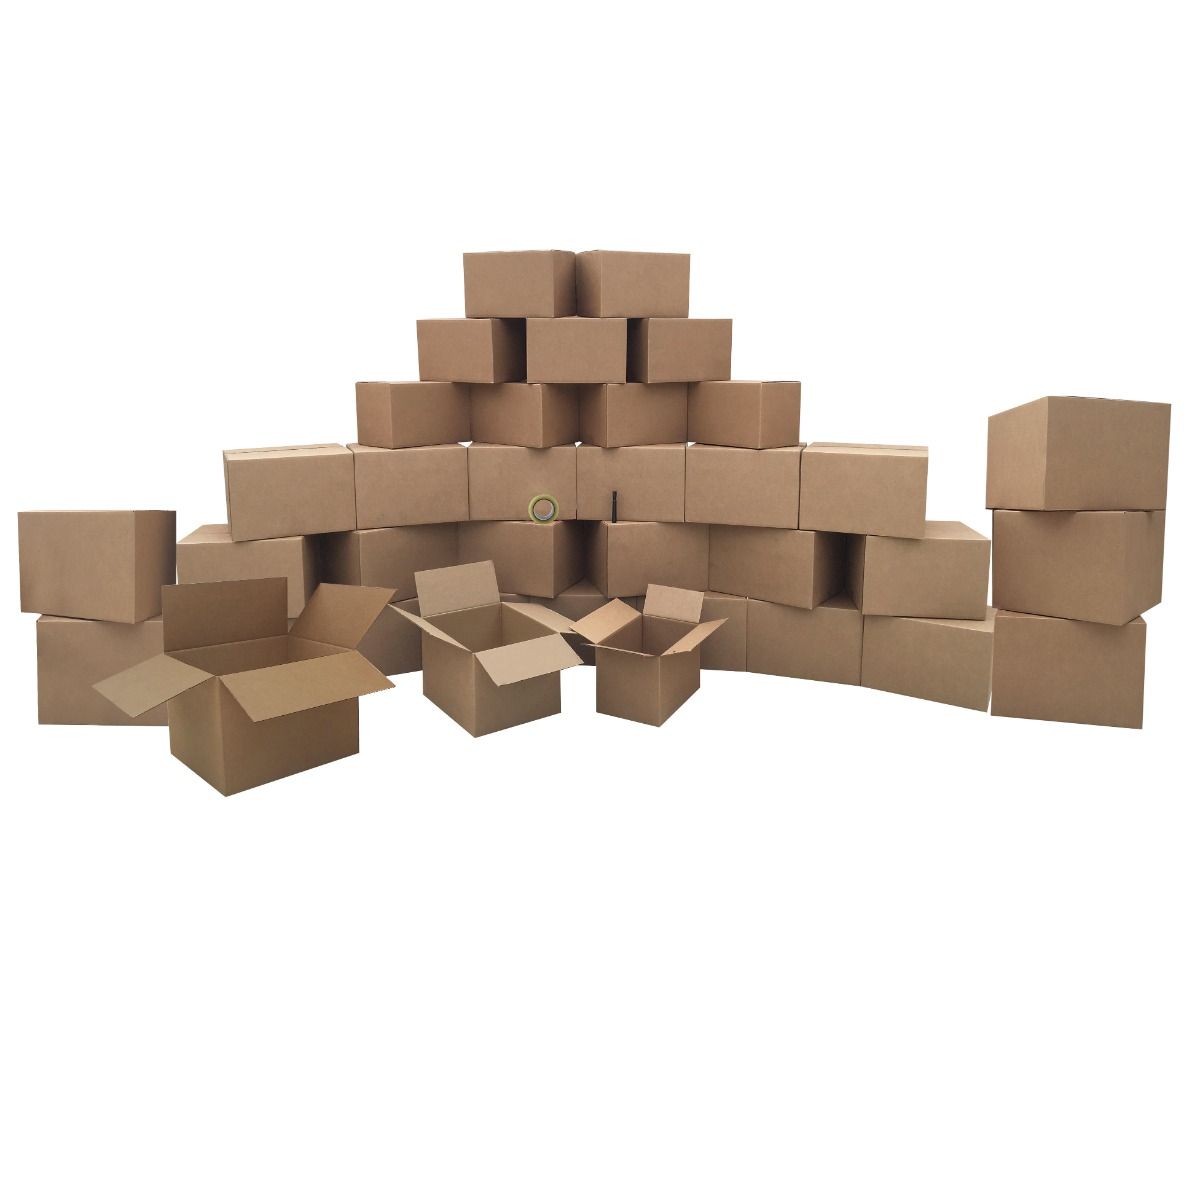  UBOXES Moving Boxes - Value Economy Kit #2 Qty: 30 Boxes & Moving  Supplies, Corrugated, Model:Moving Boxes Kit : Office Products